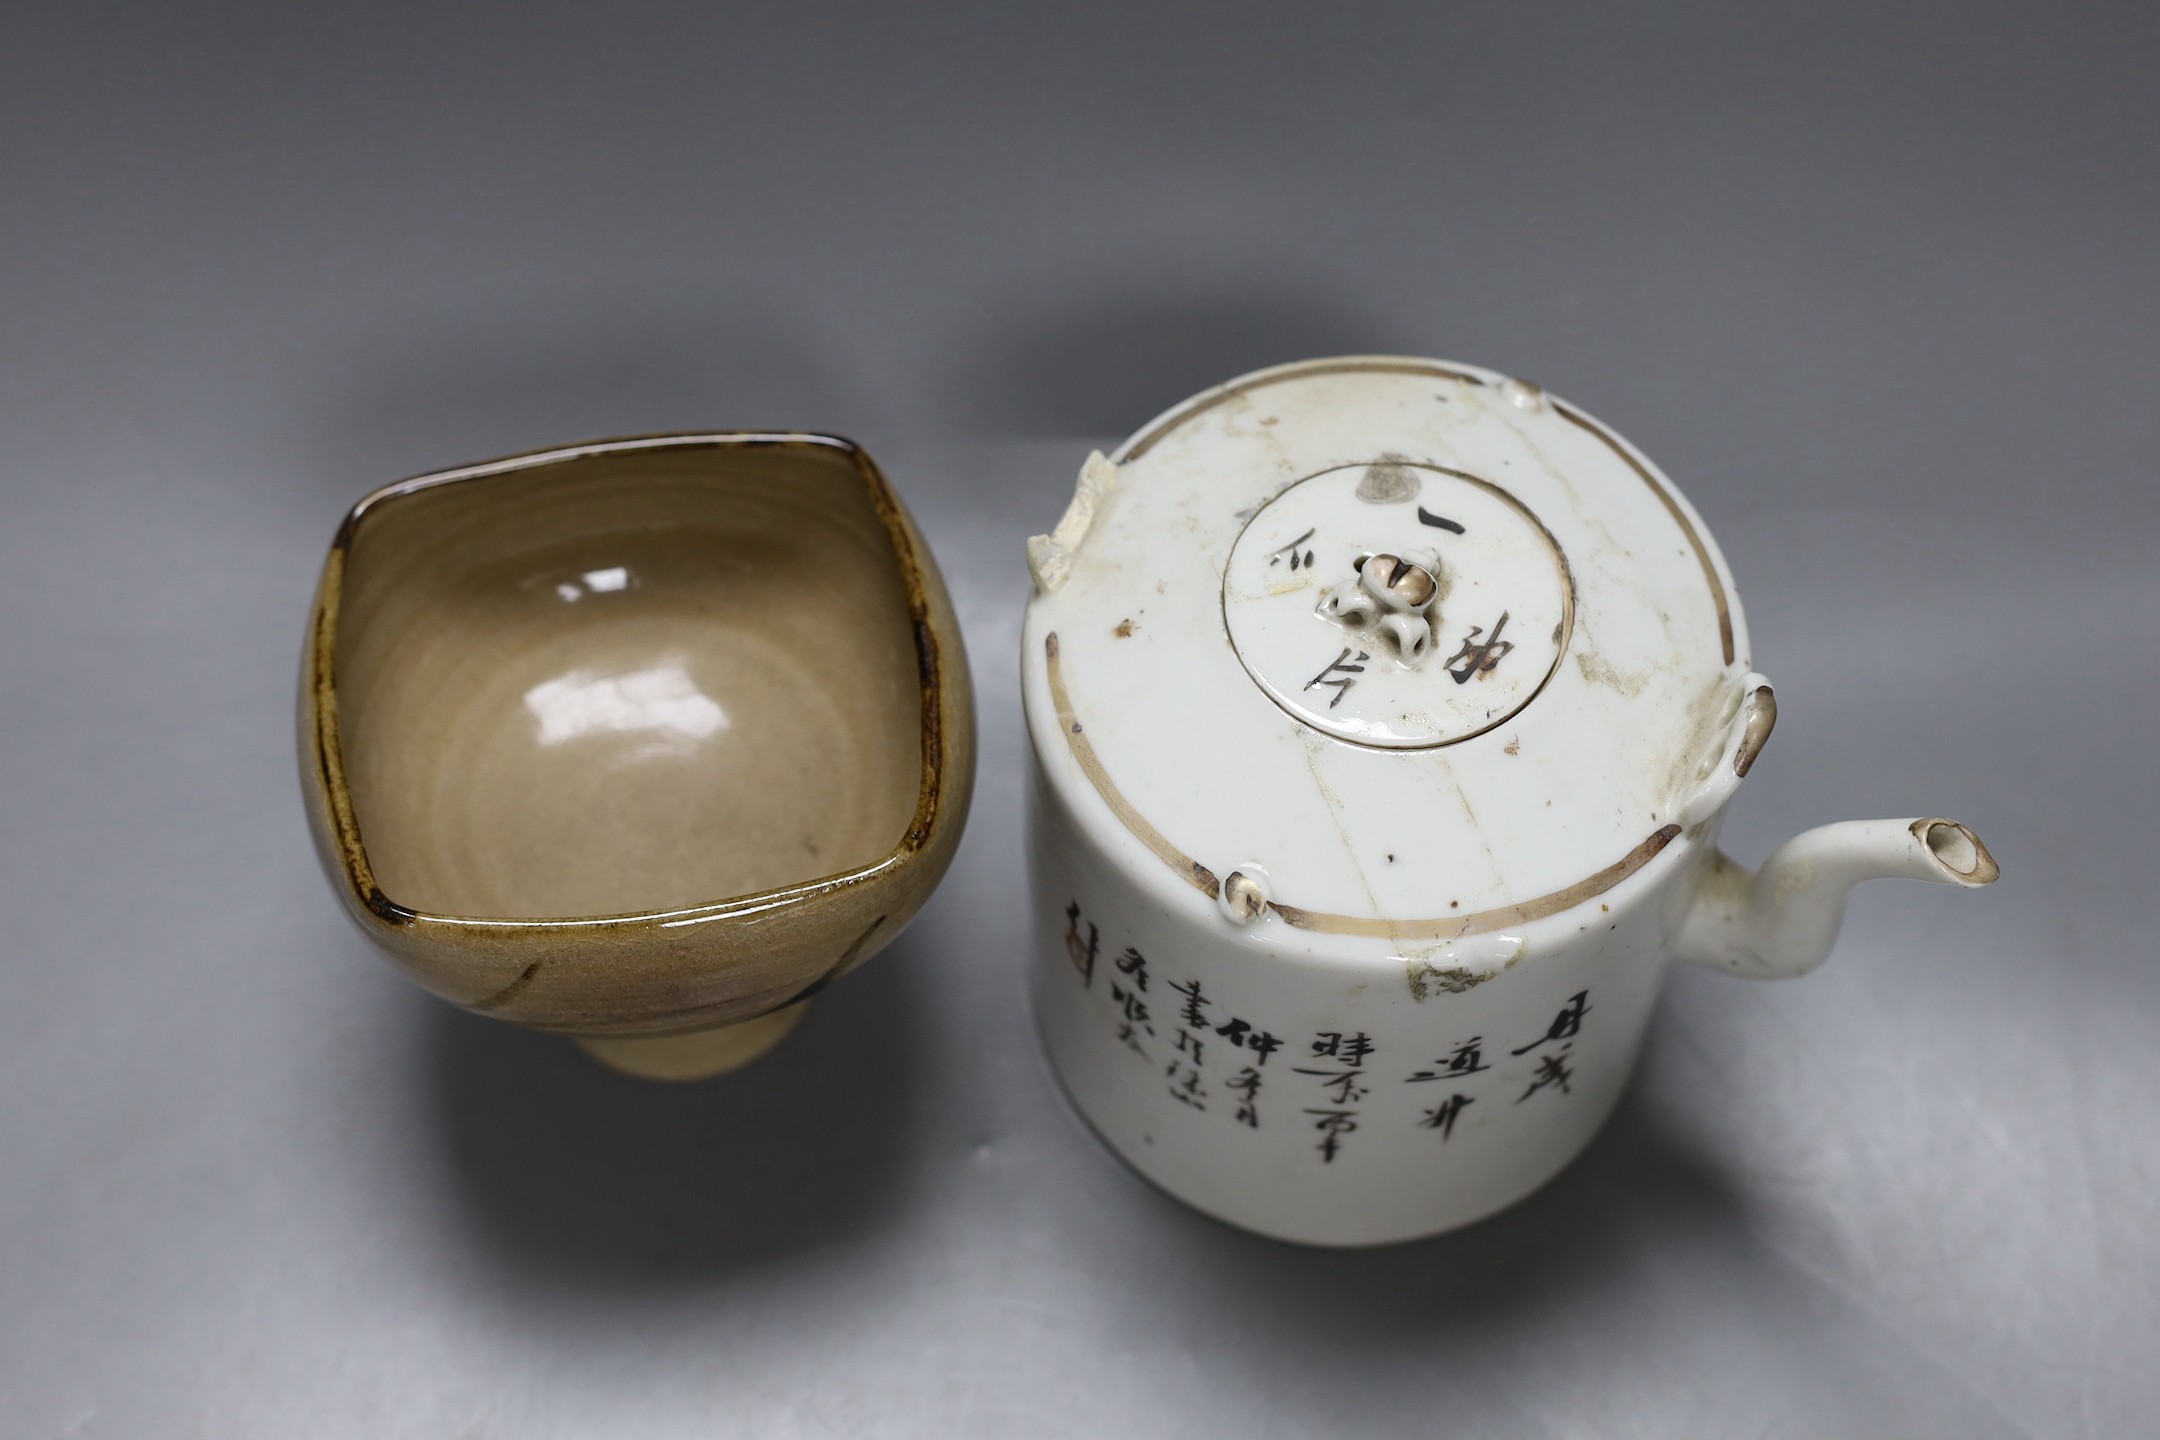 A Chinese Republic period teapot, a famille rose barrel and cover, a famille verte saucer, porcelain duck, pottery stem bowl and a resin model of Shou Lao